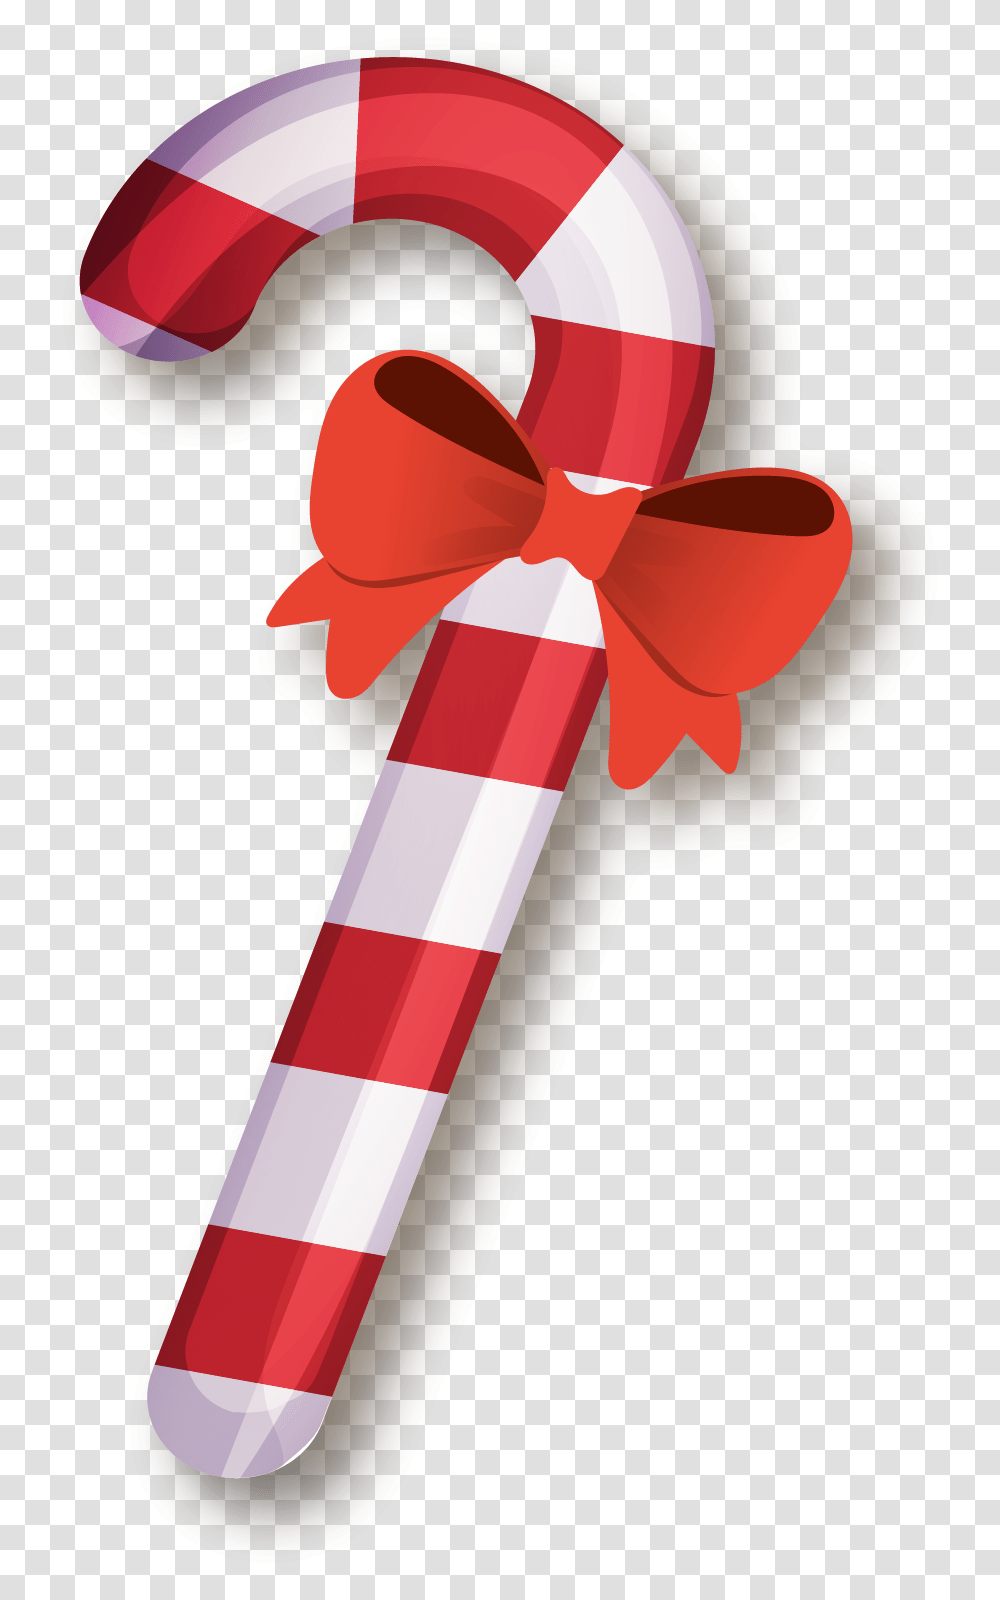 Candy Cane Christmas Sugar Christmas Candy Cane, Tie, Accessories, Accessory, Text Transparent Png